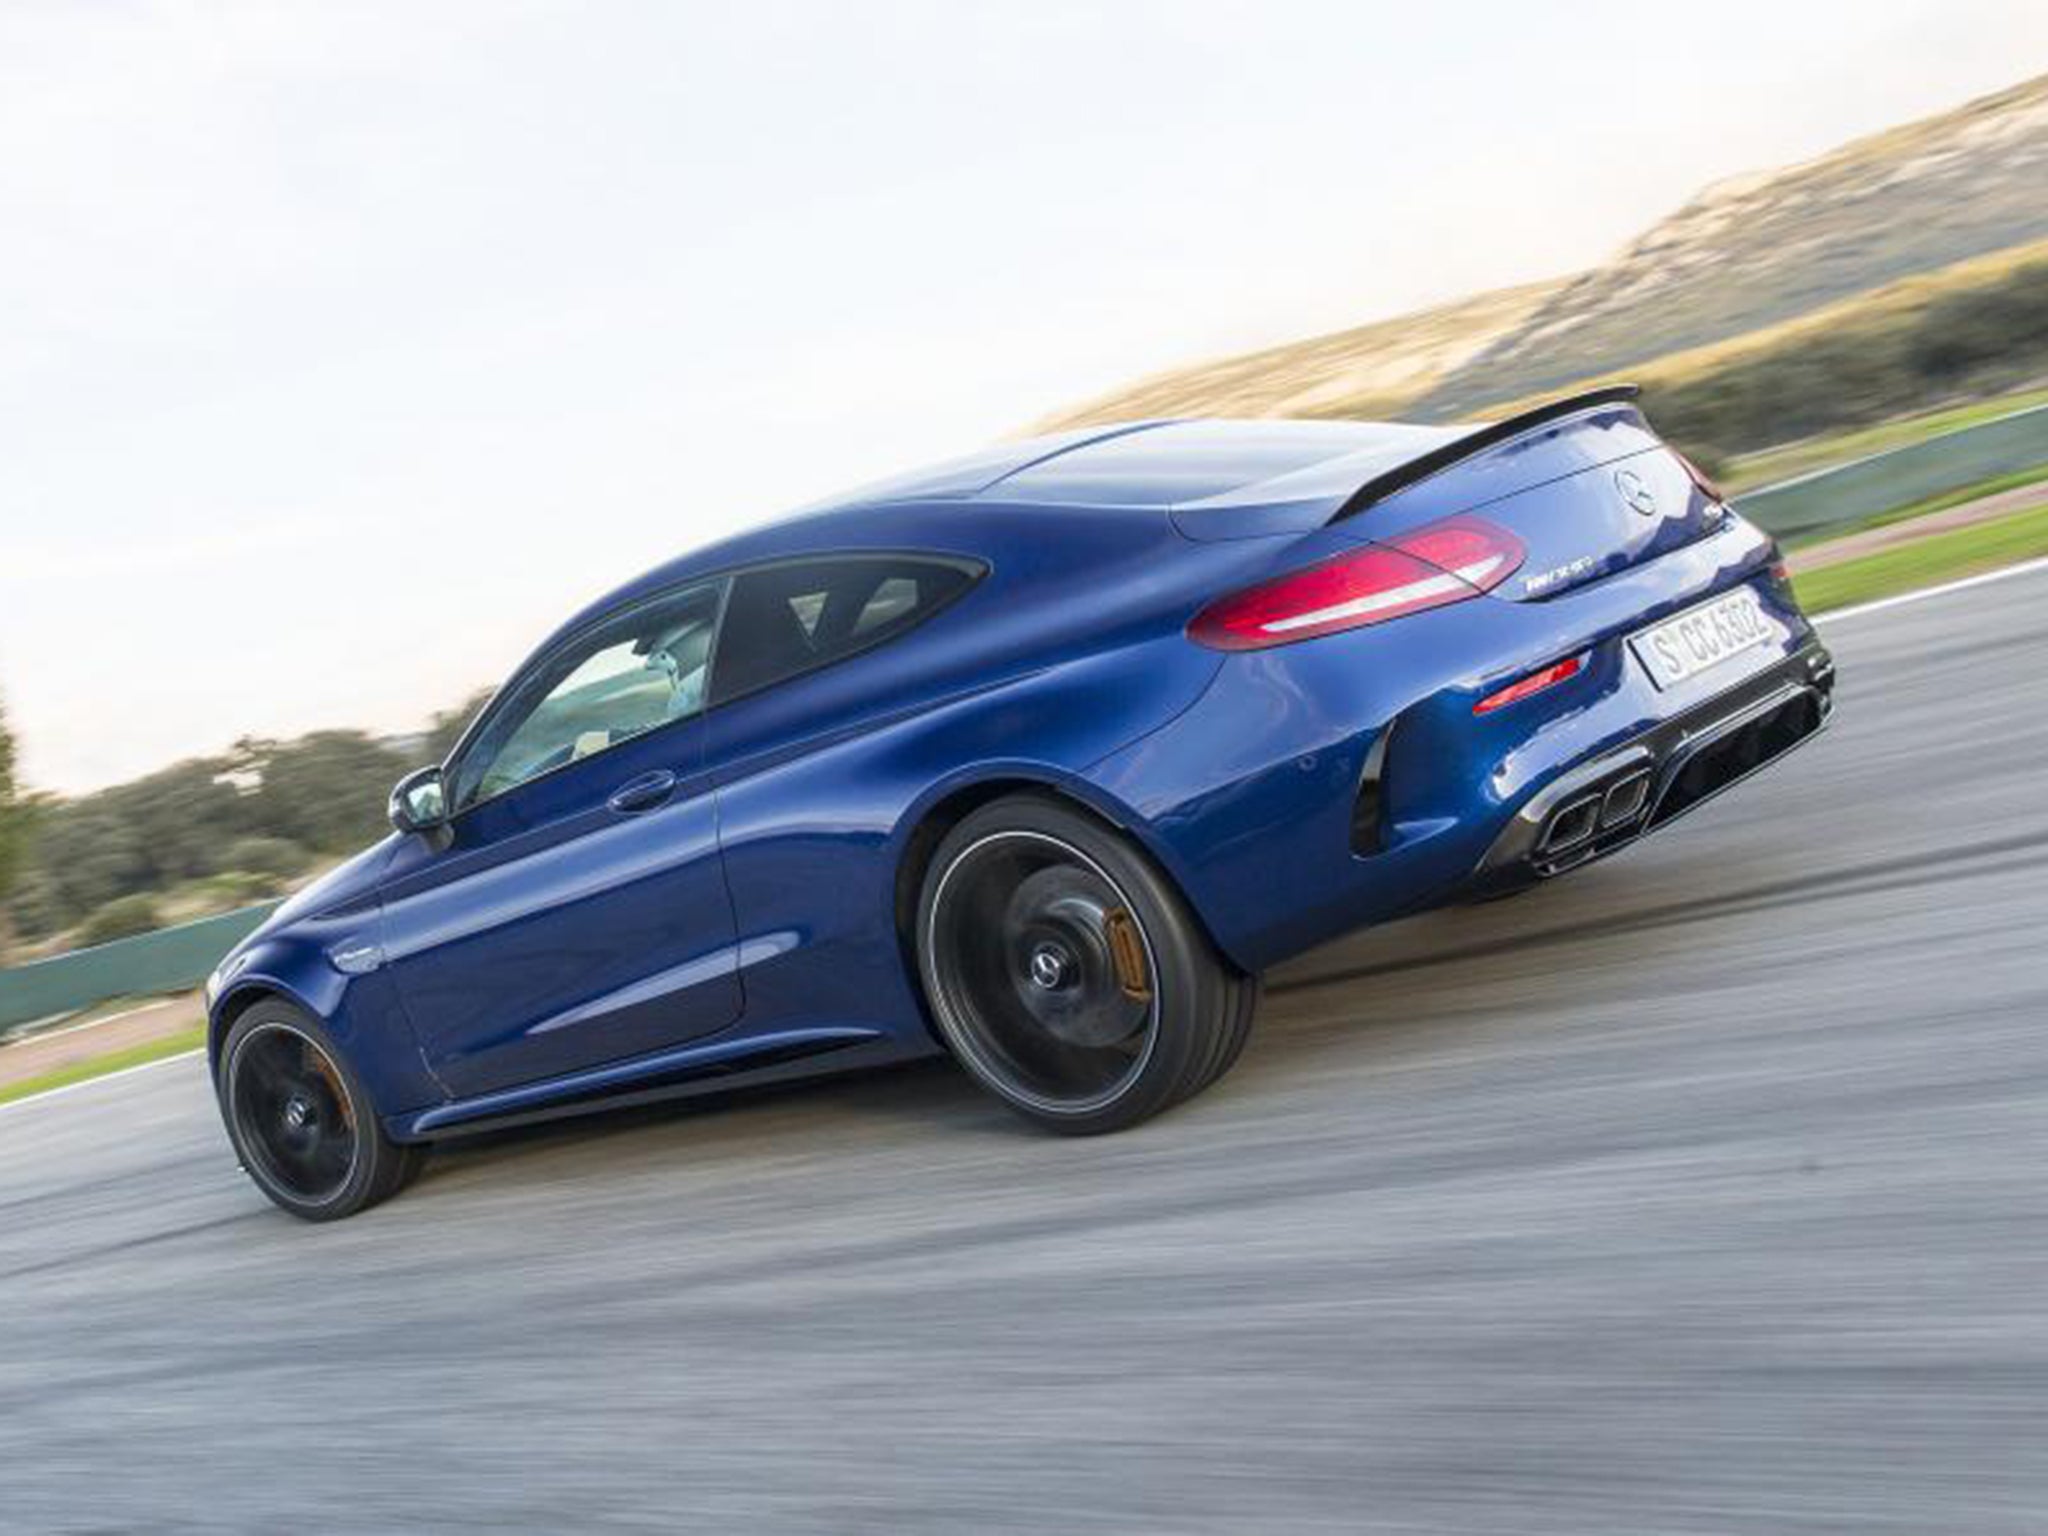 Mercedes C 63 Amg Coupe Mercedes-AMG C63 S Coupé, car review: Magnificent car proves cubic inches  aren't everything | The Independent | The Independent